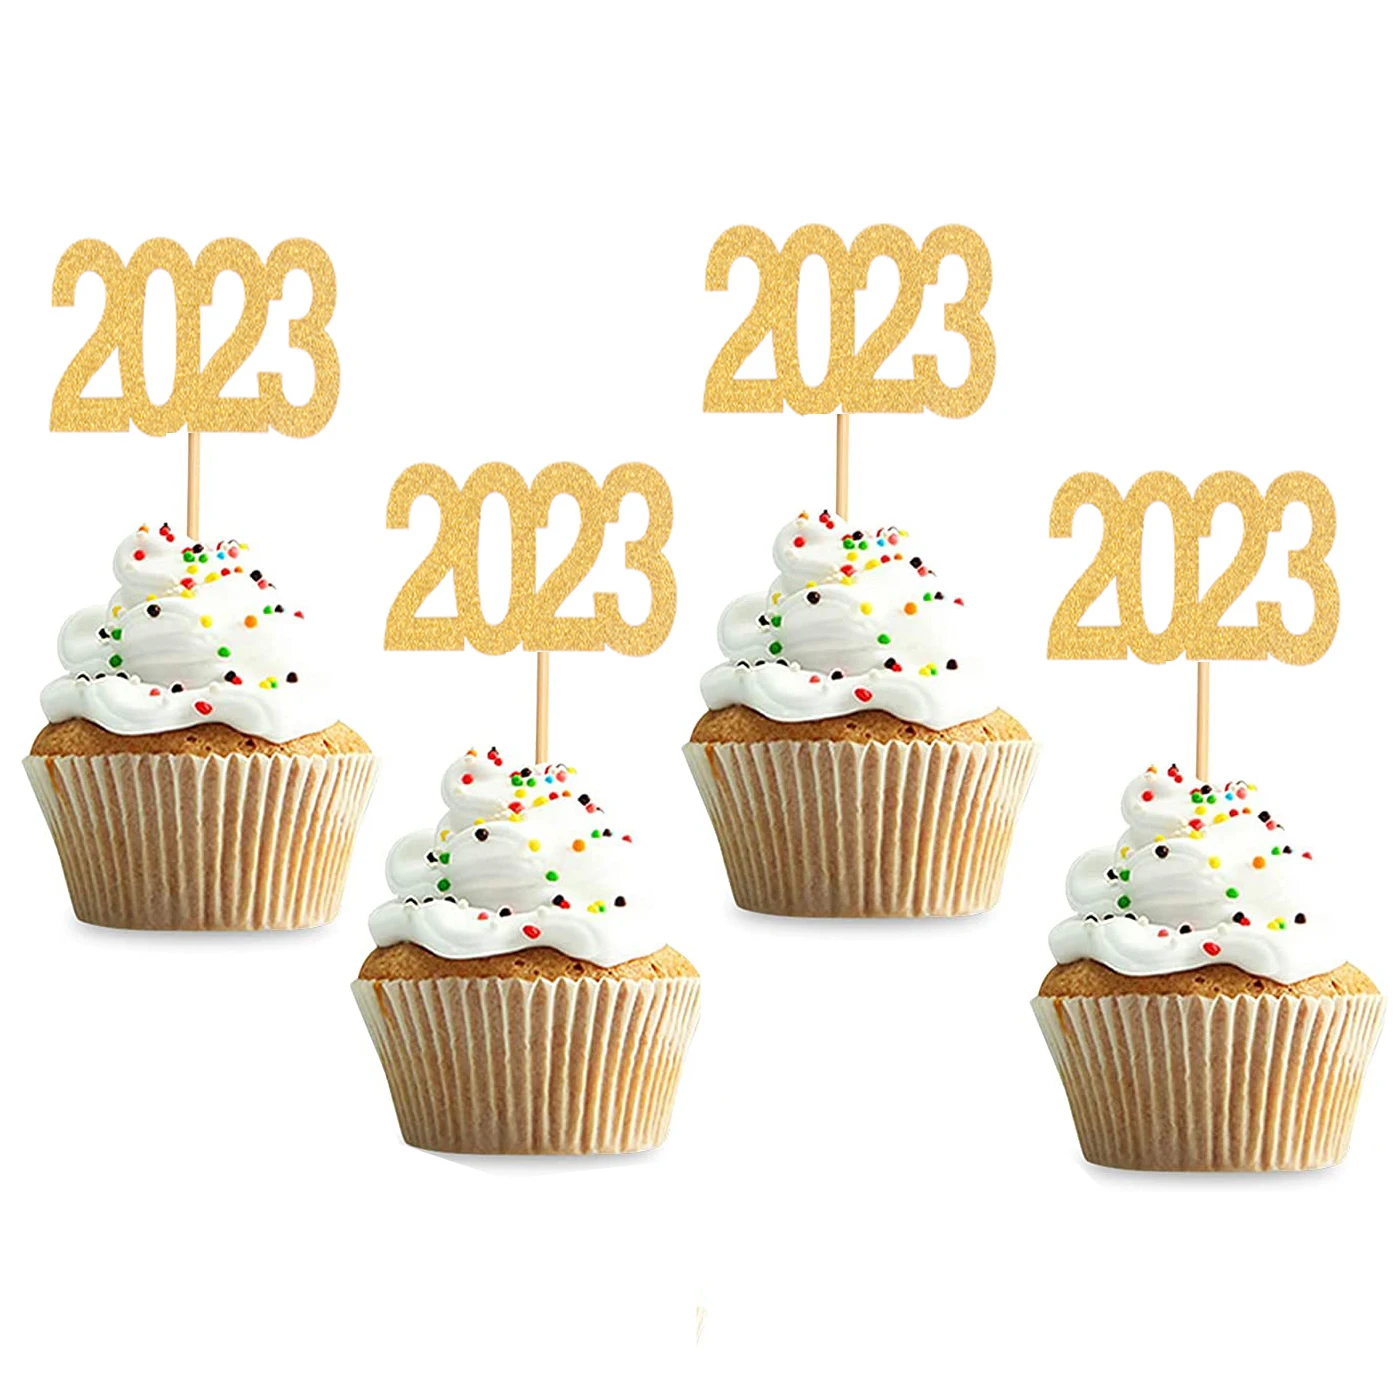 

12pcs Glitter Gold 2023 Cake Topper Cupcake Toppers Christmas Decor Happy 2023 New Year Eve Party Cake Decoration Navidad Natal